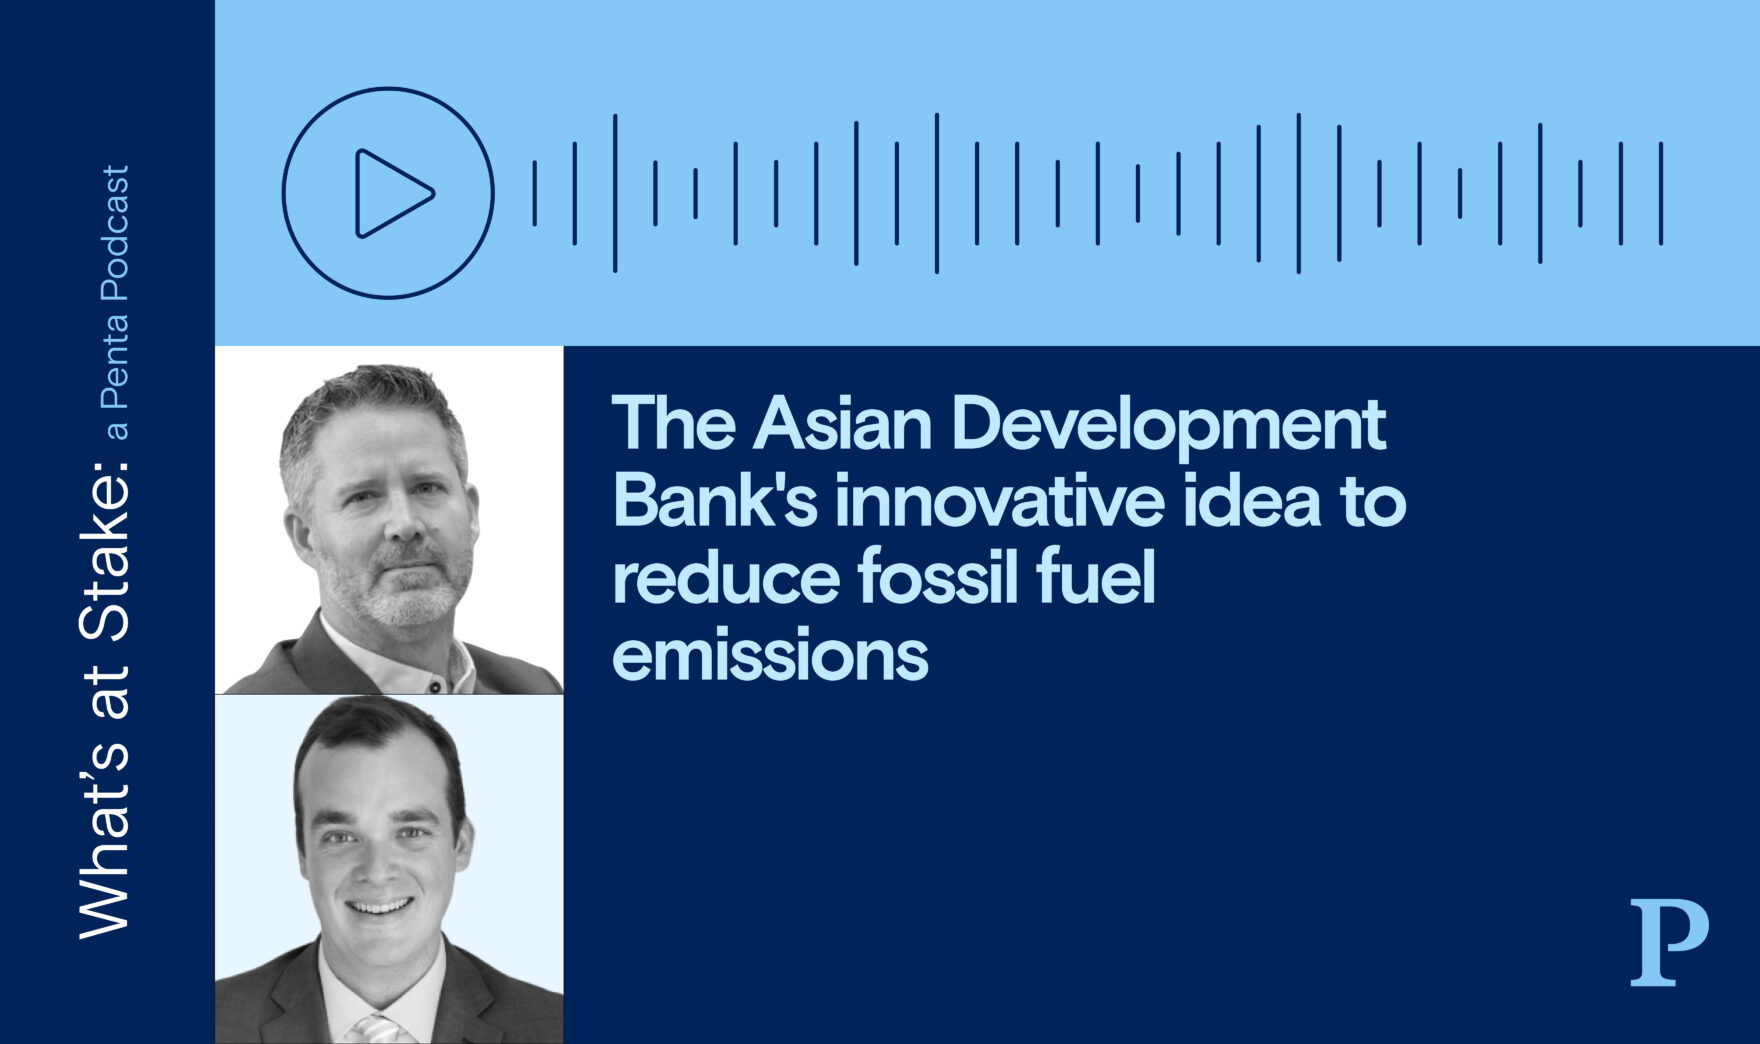 The Asian Development Bank’s innovative idea to reduce fossil fuel emissions